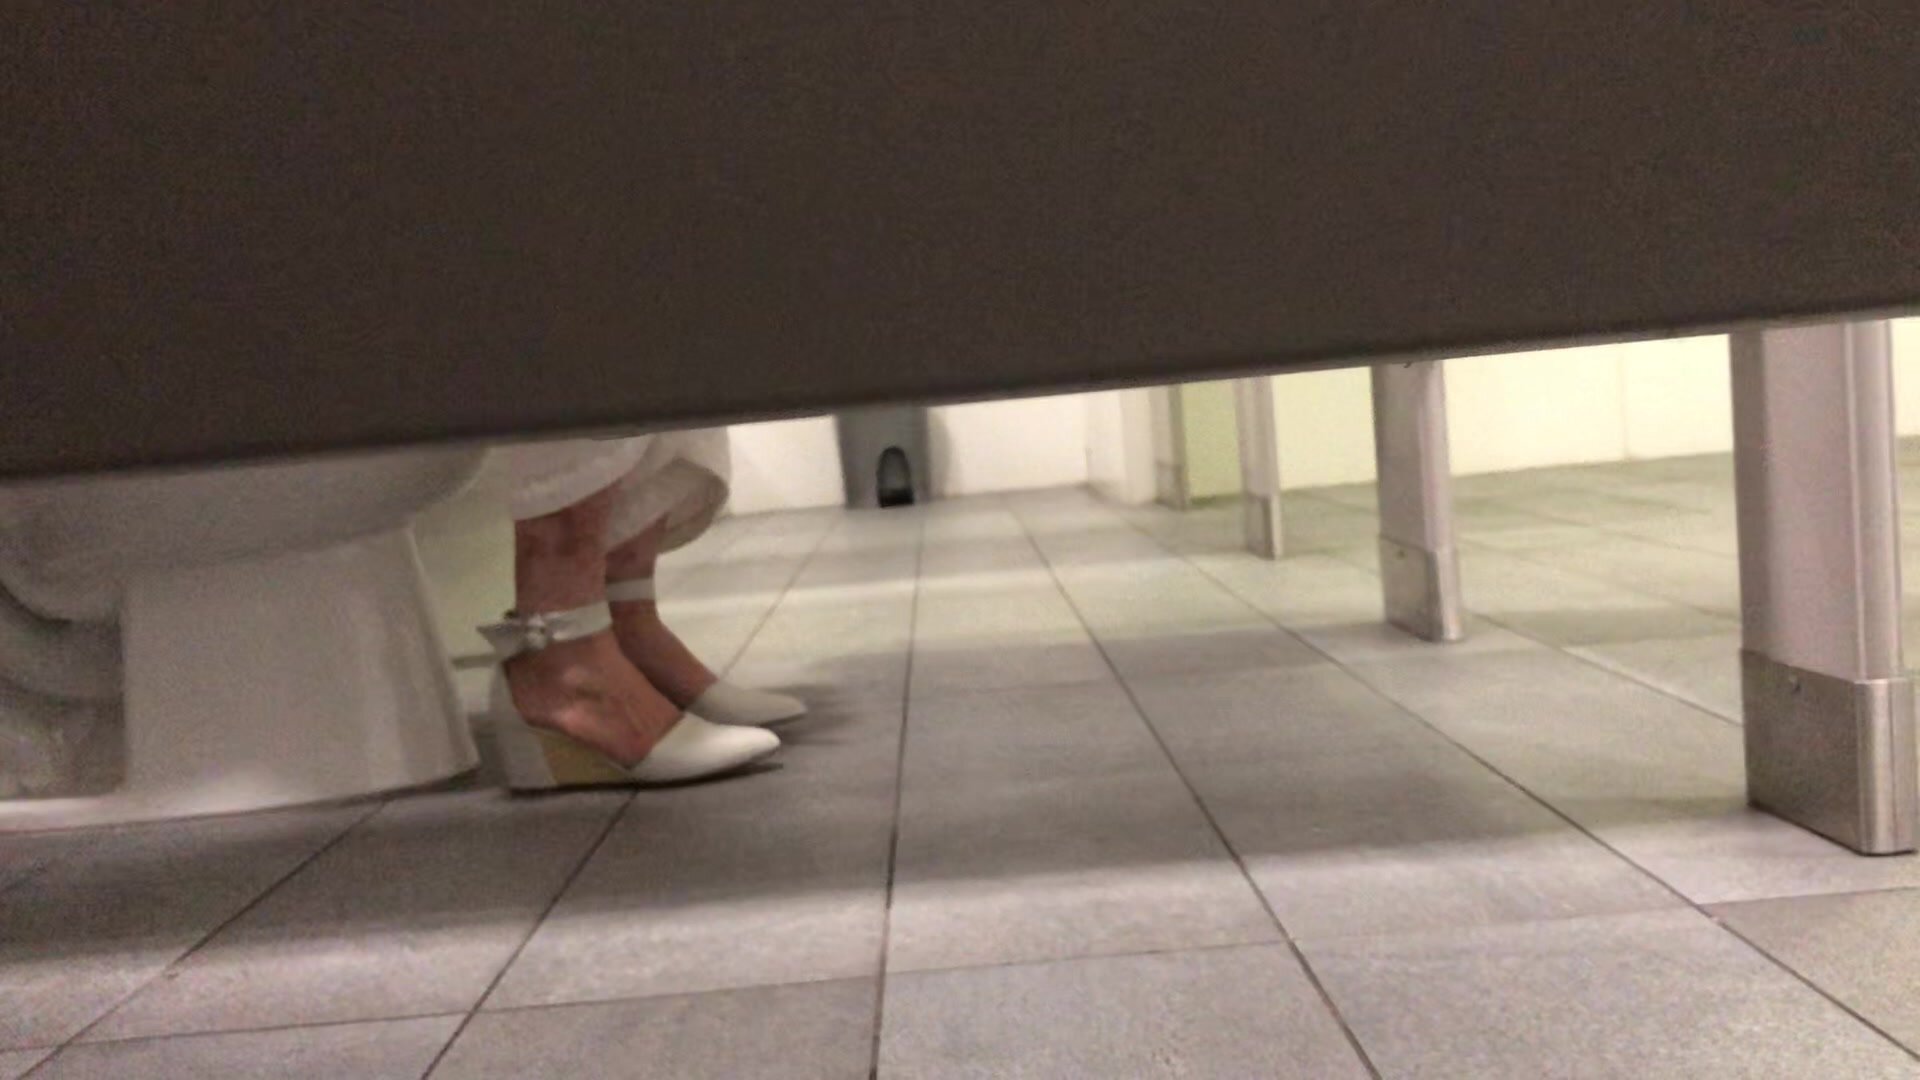 White Shoes Lady Peeing and Poop Attempt Voyeur